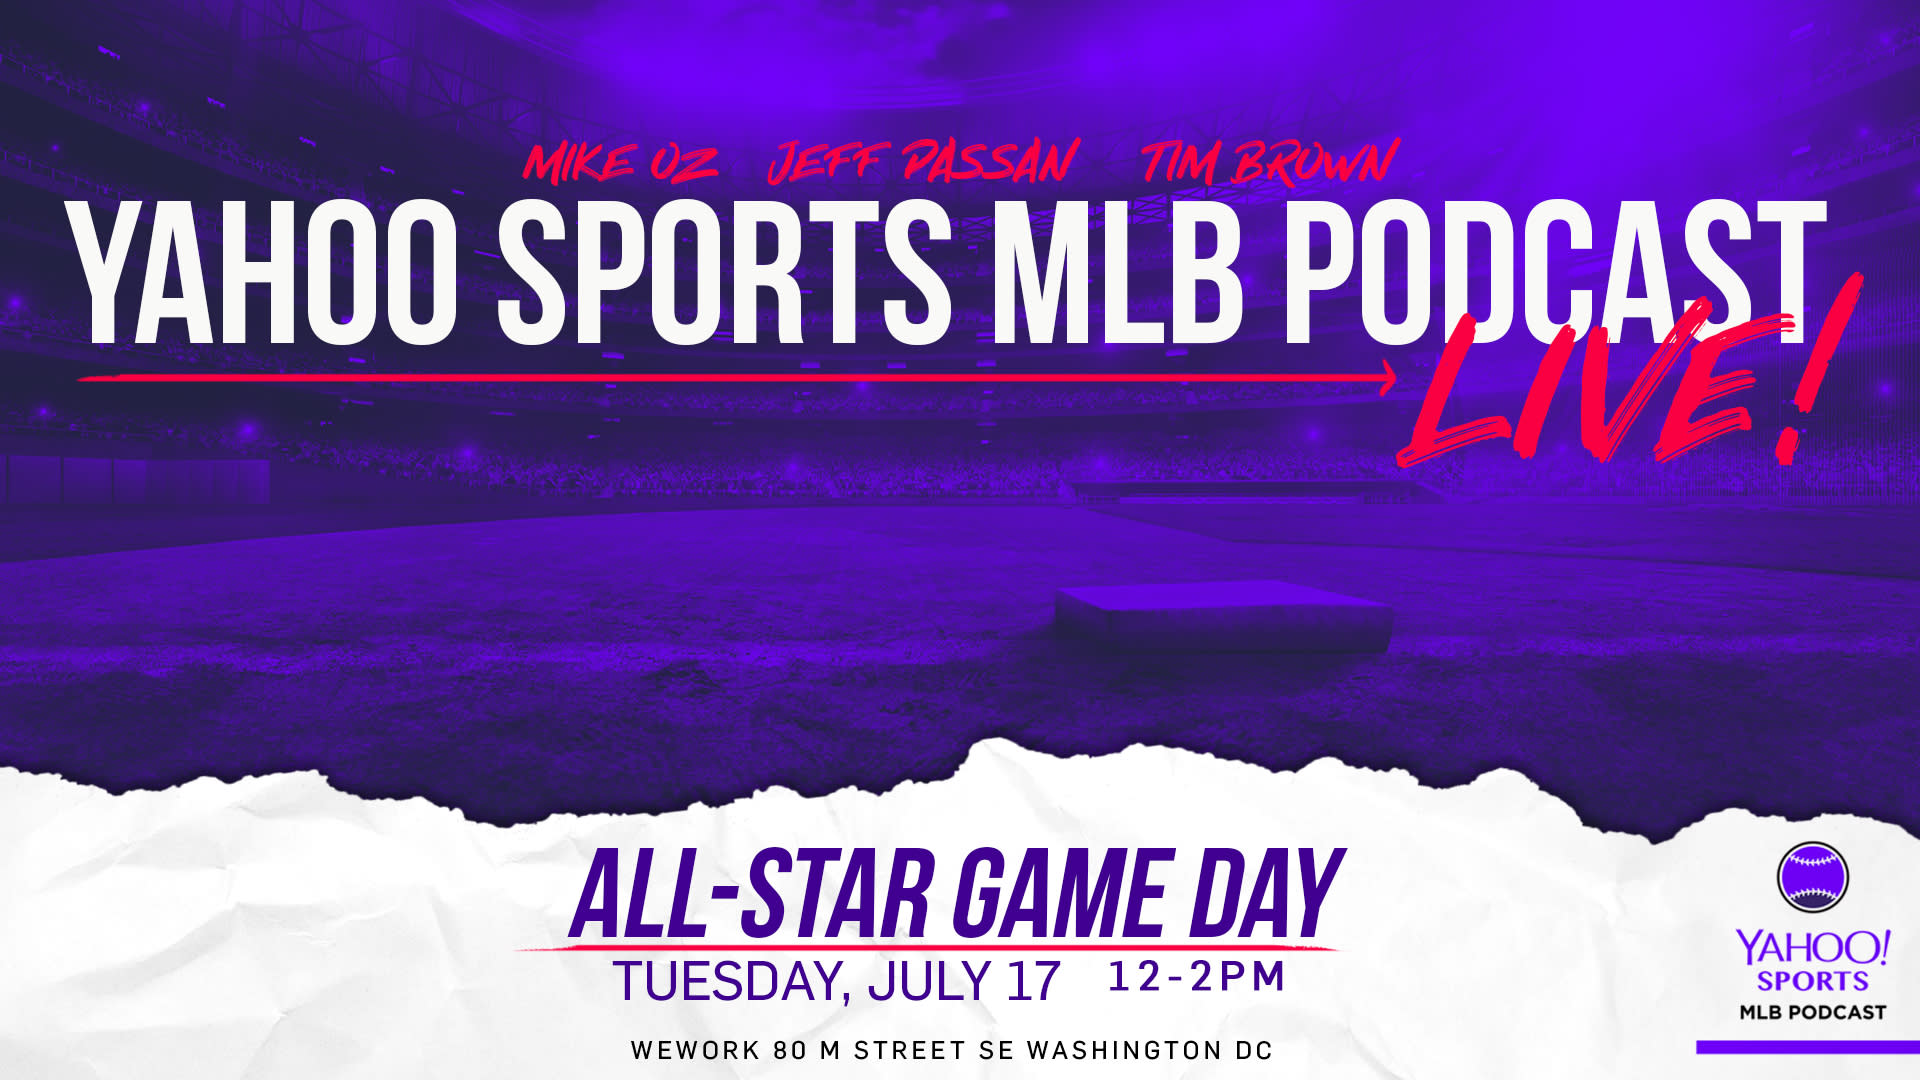 The Yahoo Sports MLB Podcast is going LIVE in D.C.! Video